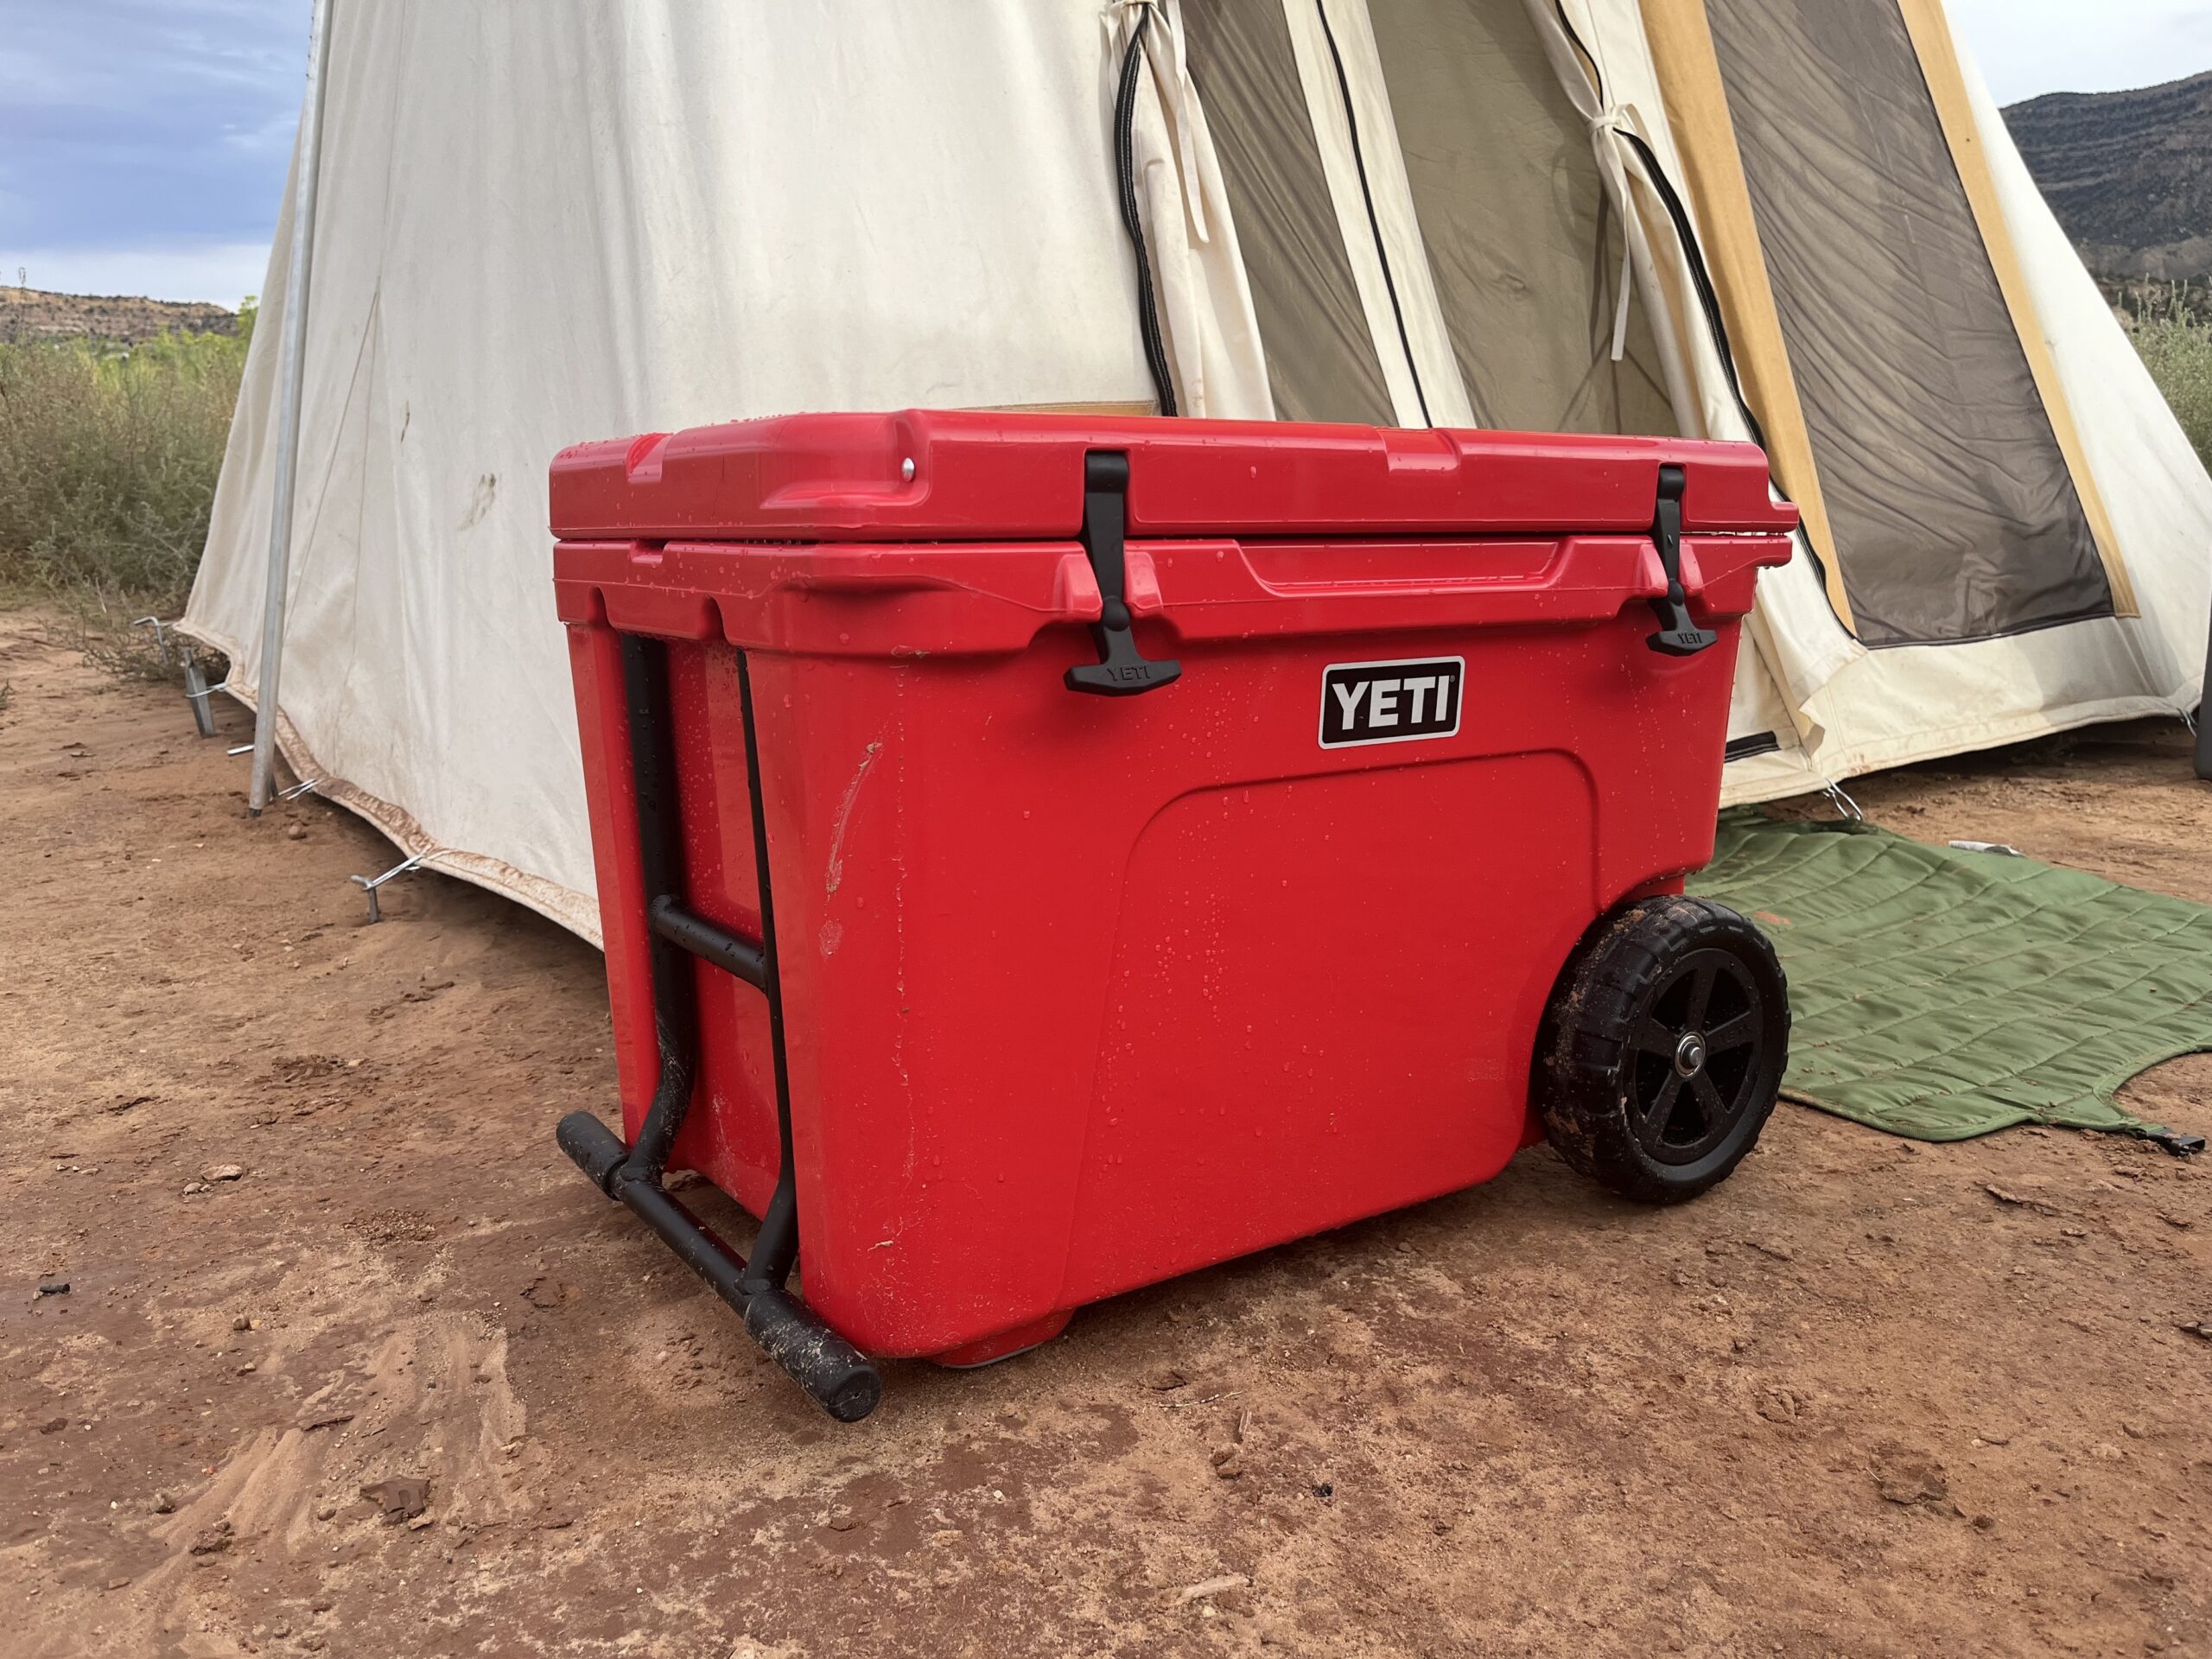 YETI Roadie 24 hard cooler weighs less yet performs better than previous  models